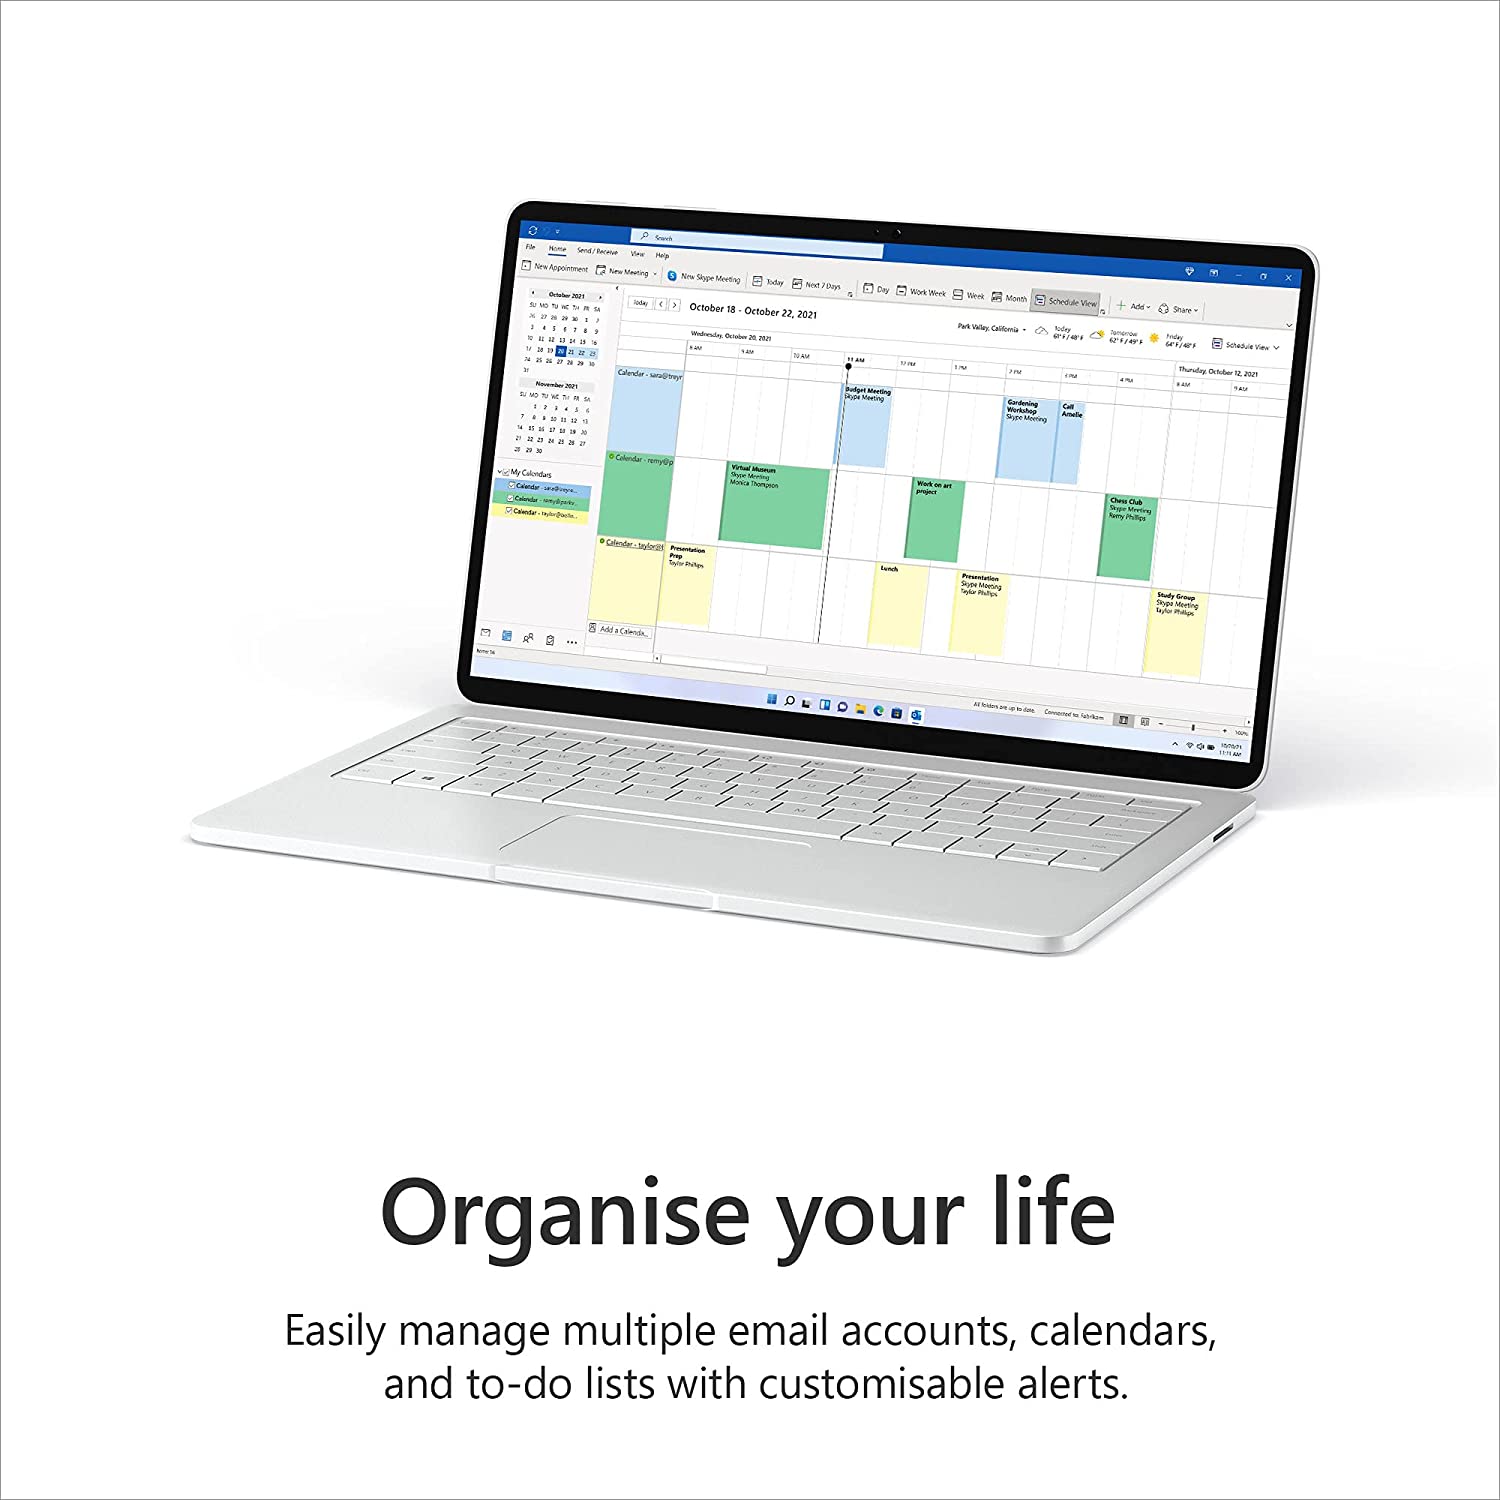 Microsoft 365 Family, Office Software Up To 6 users, 1 Year Subscription - New